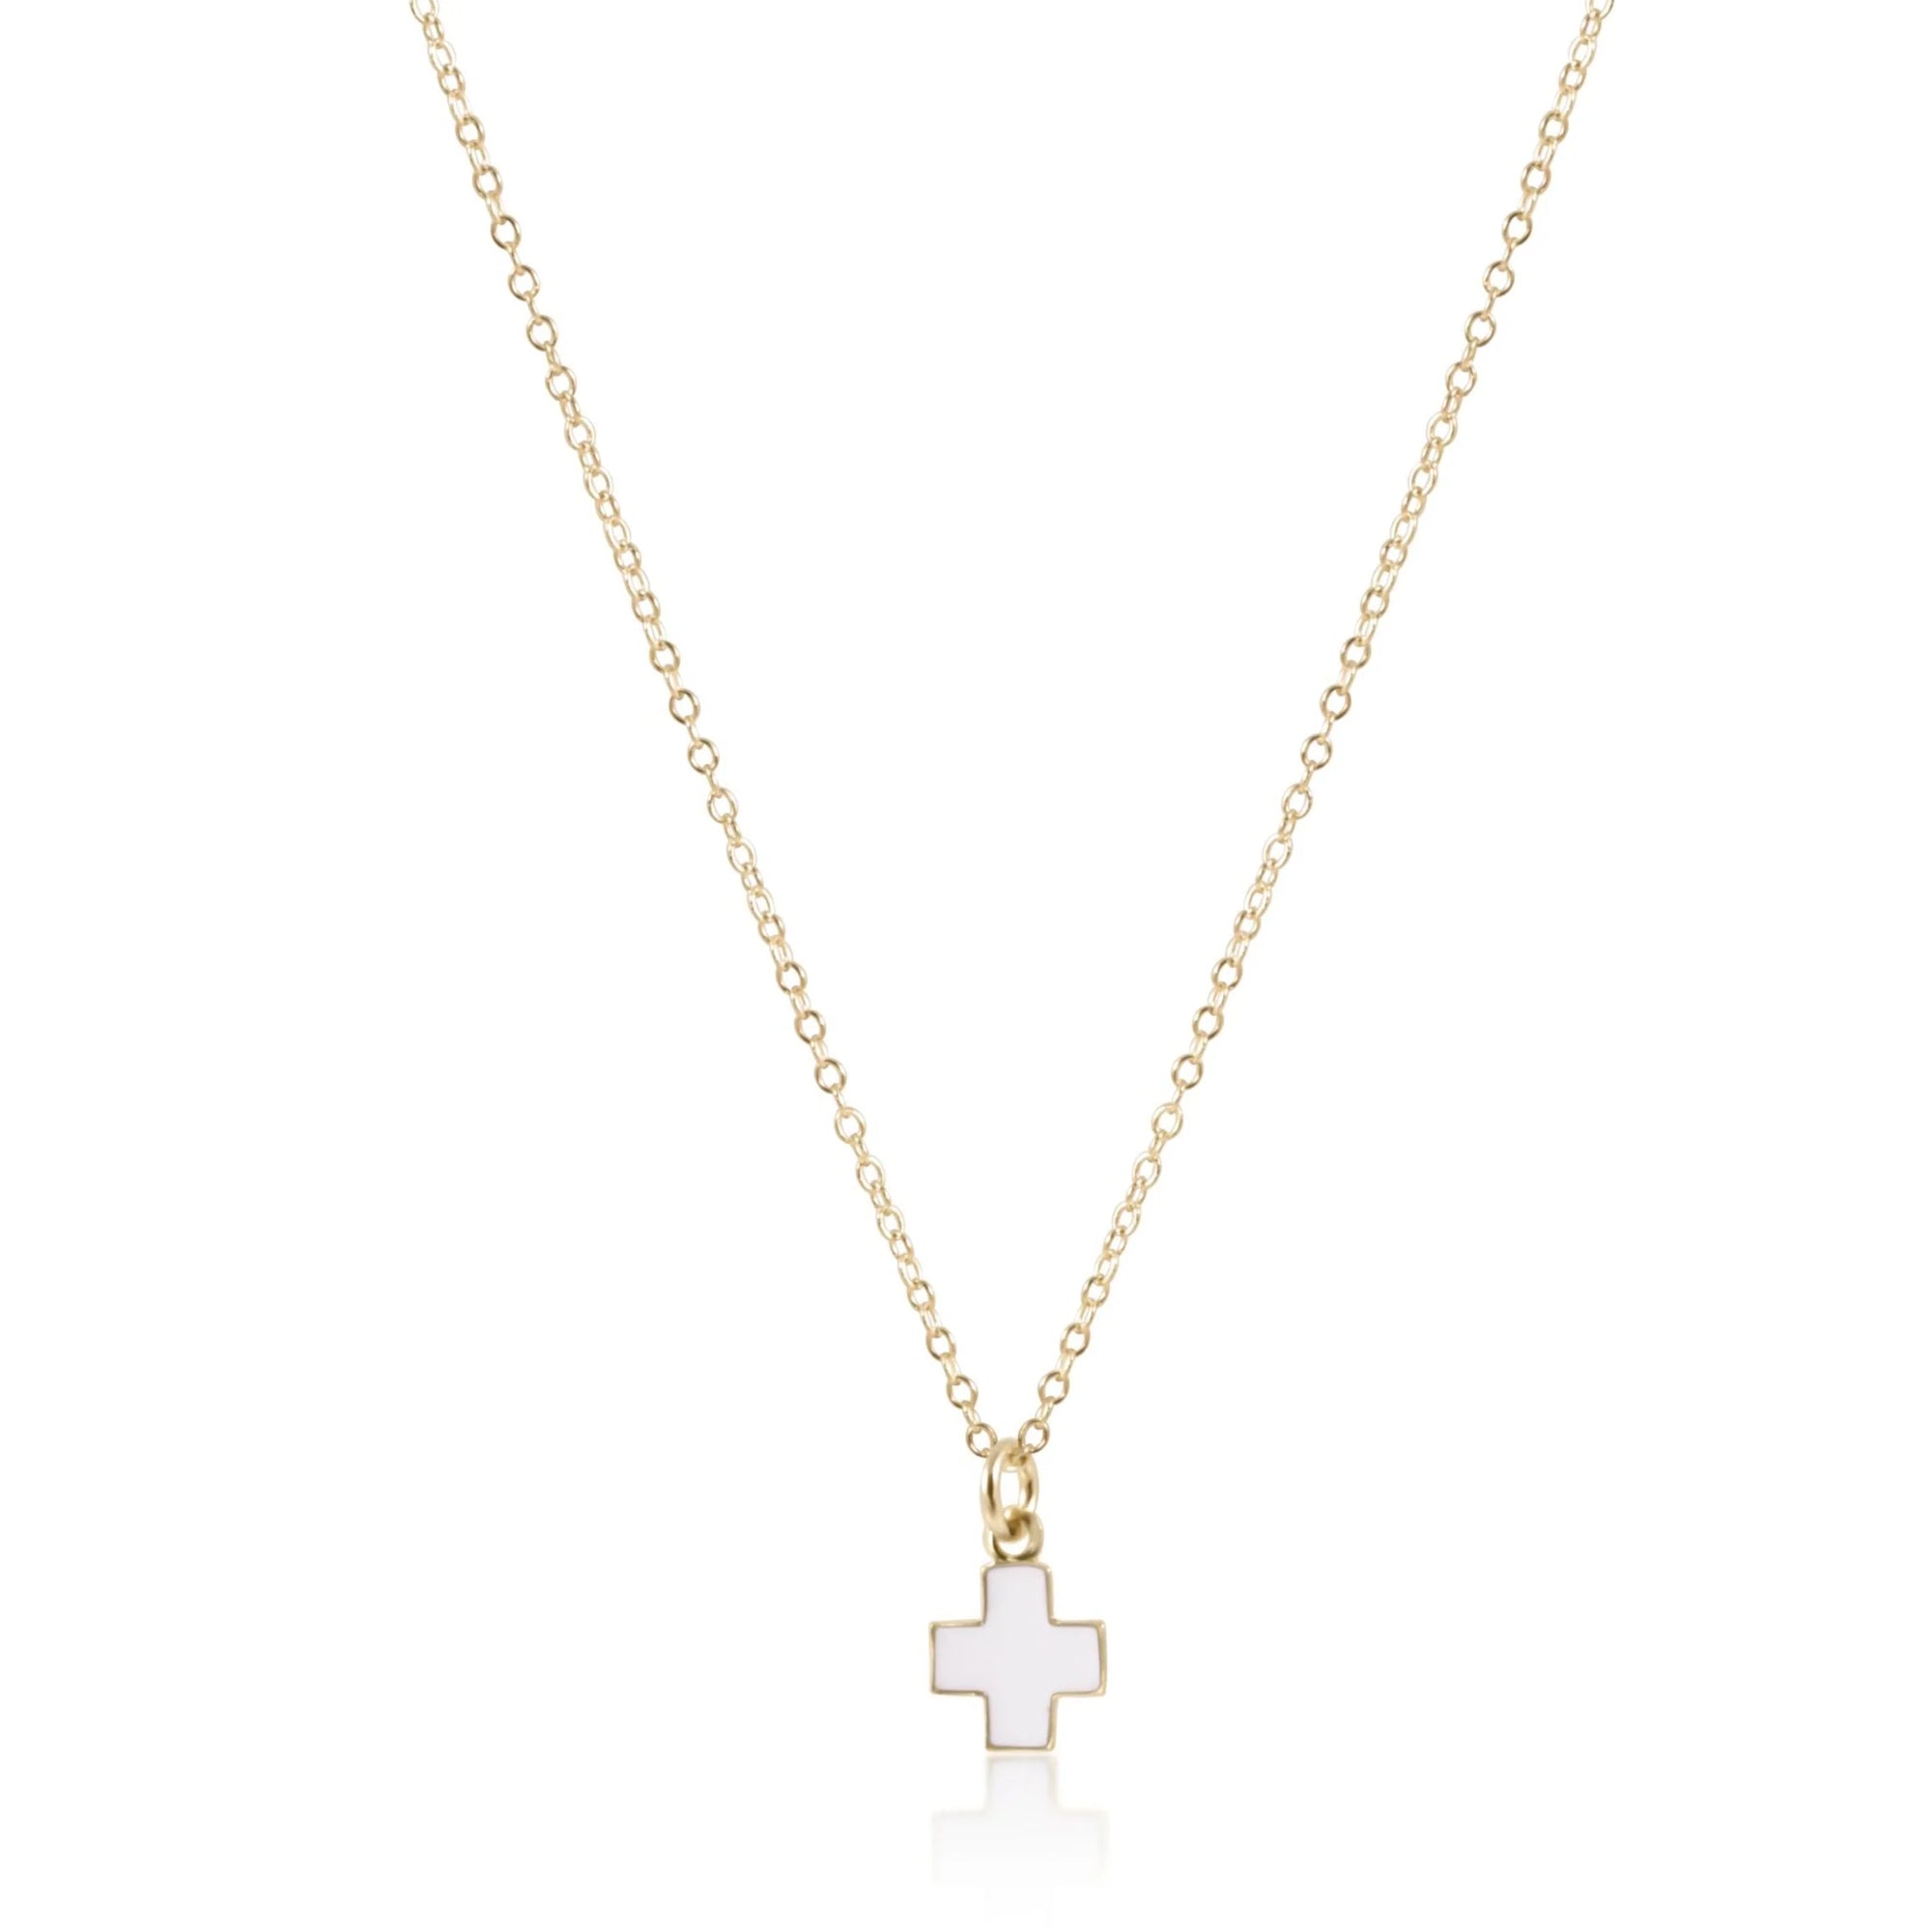 16" Gold Necklace - Off White Signature Cross